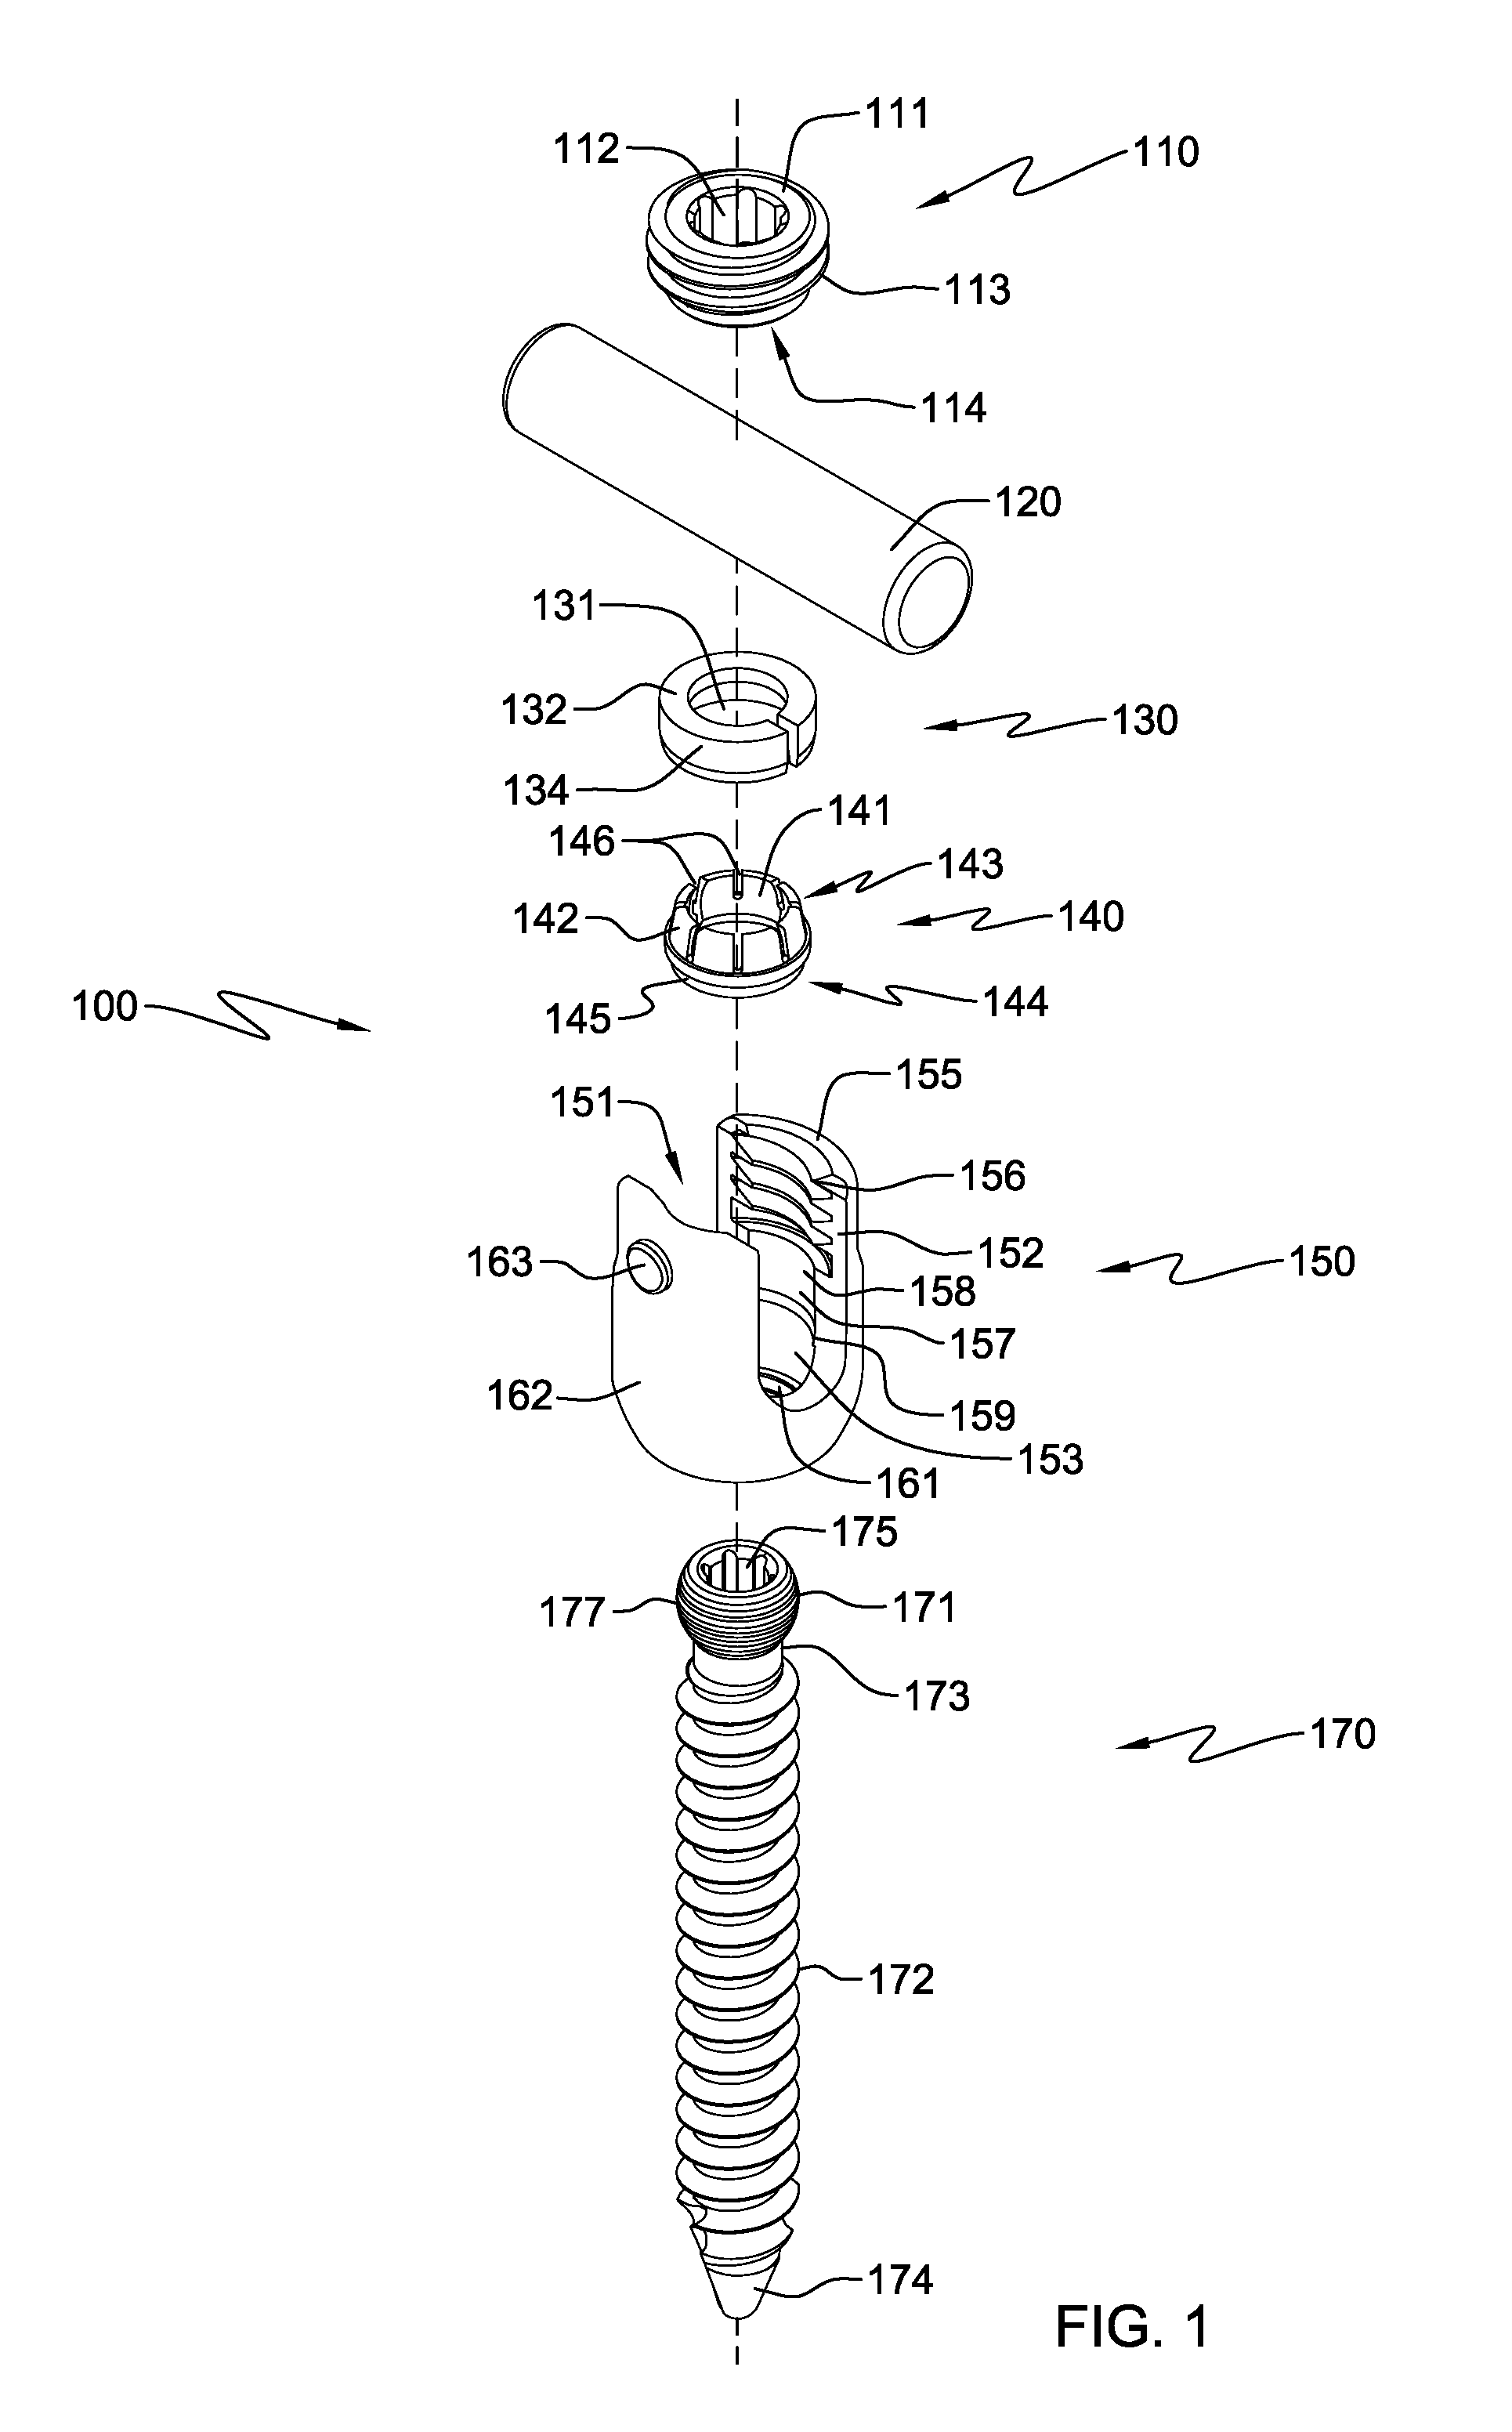 Pedicle screw assembly and method of assembly